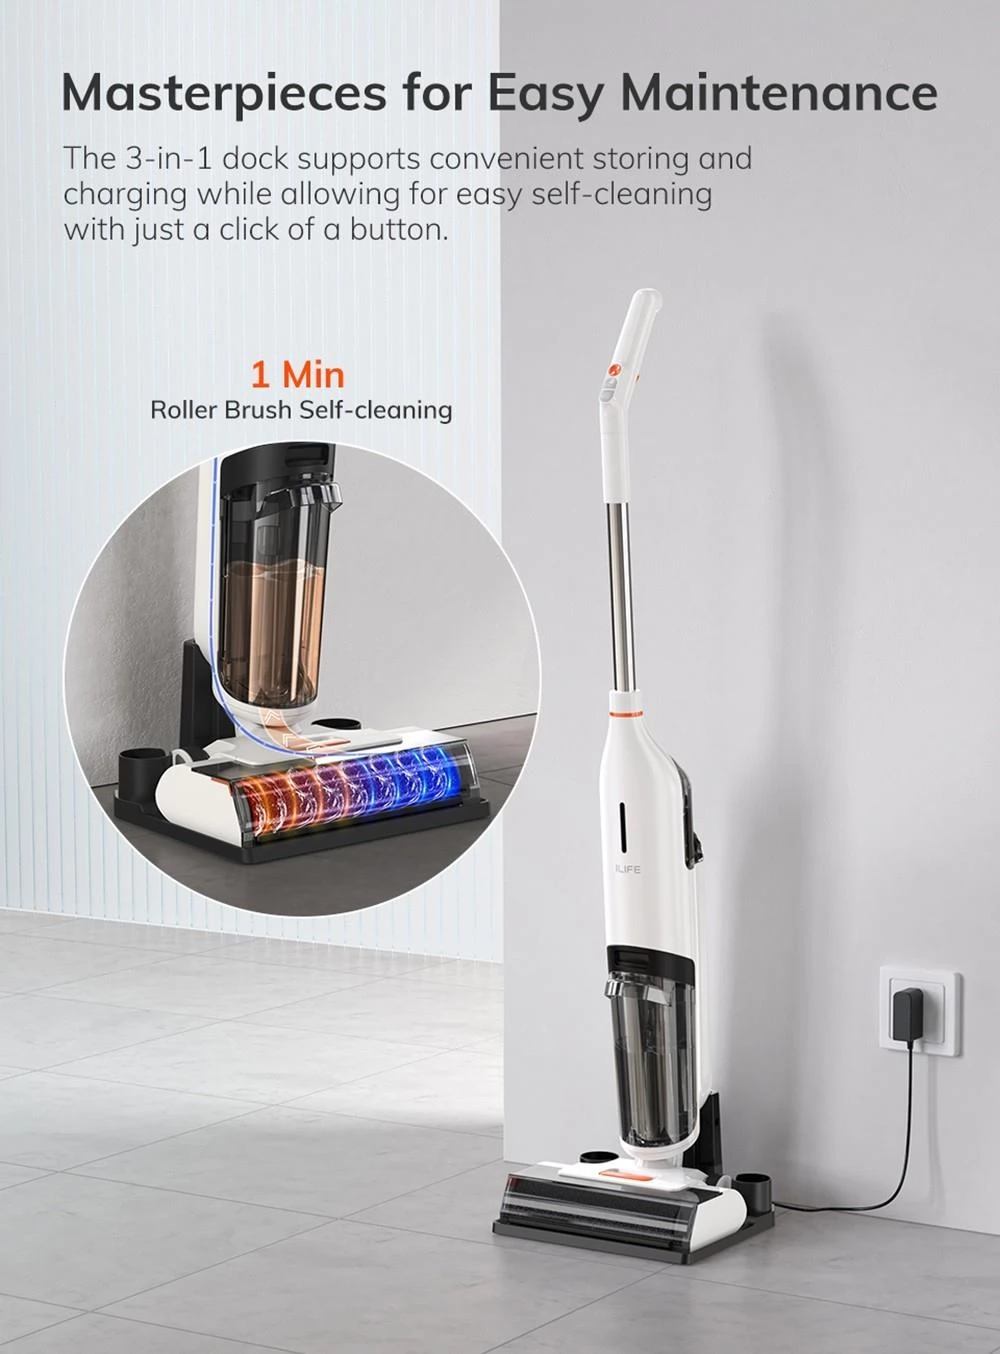 ILIFE W90 Cordless Wet Dry Vacuum Cleaner, 3 in 1 Vacuum Mop and Wash, Self-Cleaning, 700ml Water Tank, 30Mins Runtime